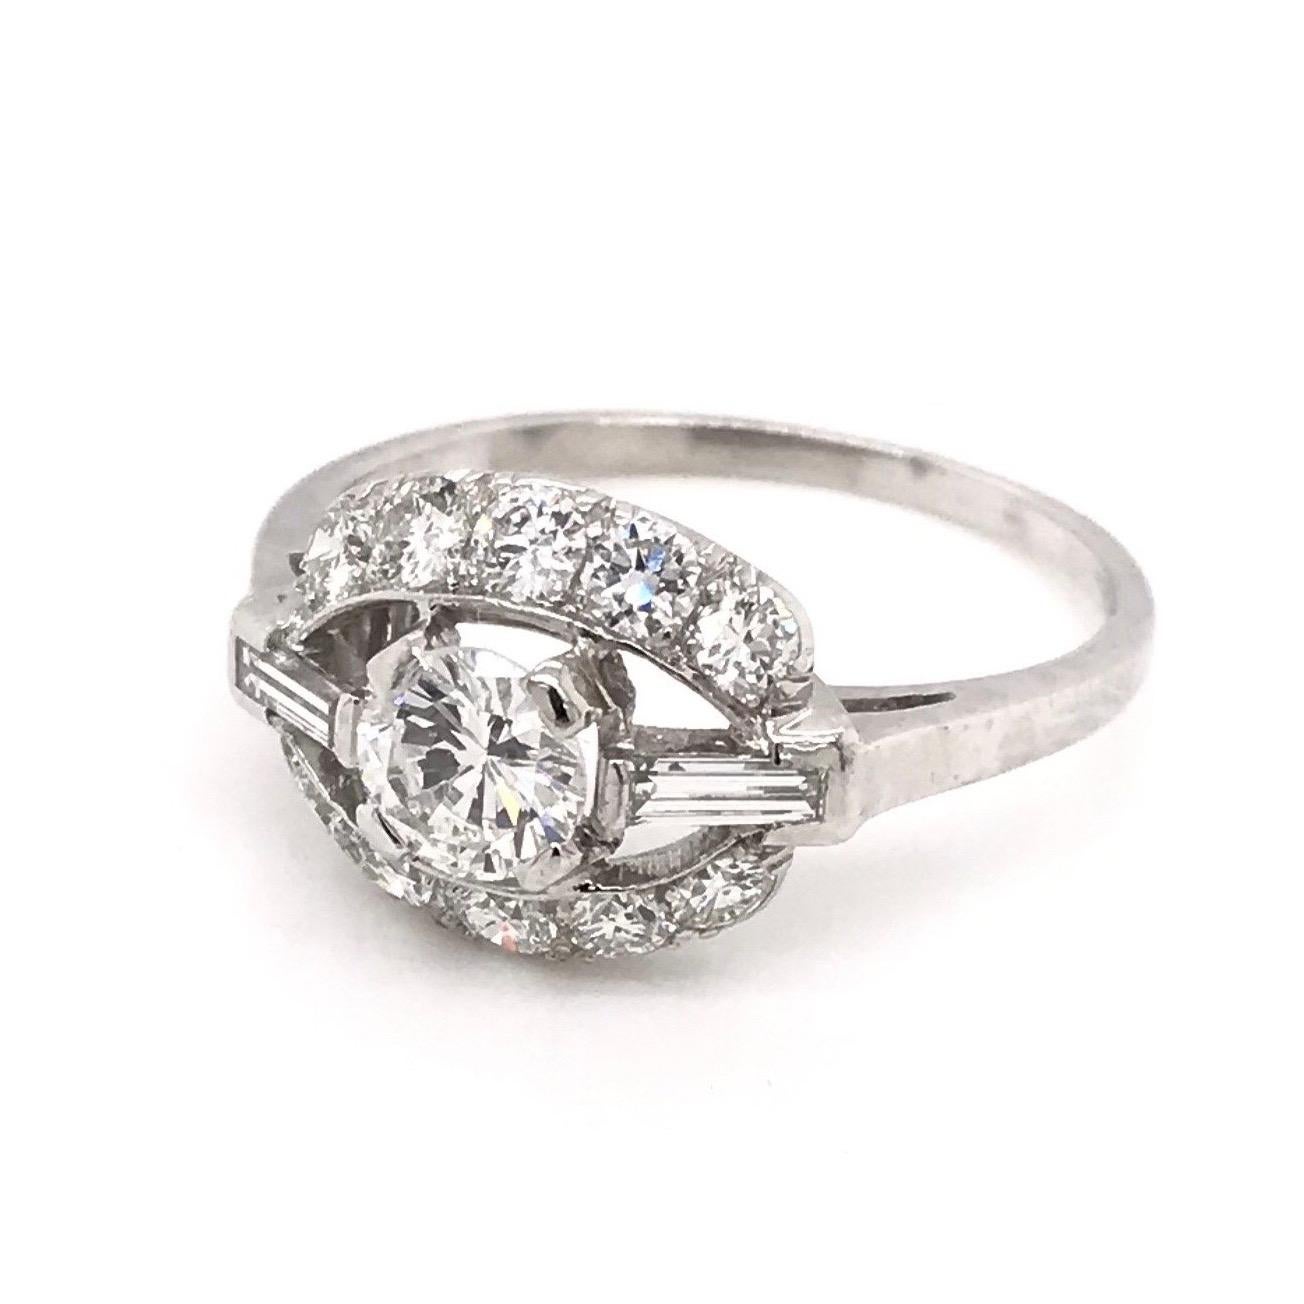 This vintage piece was crafted sometime during the Mid Century design period ( 1940-1960 ). This sweet and simple setting features a 0.40 carat diamond in the center. The center diamond grades approximately I in color, VS2 in clarity. The setting is